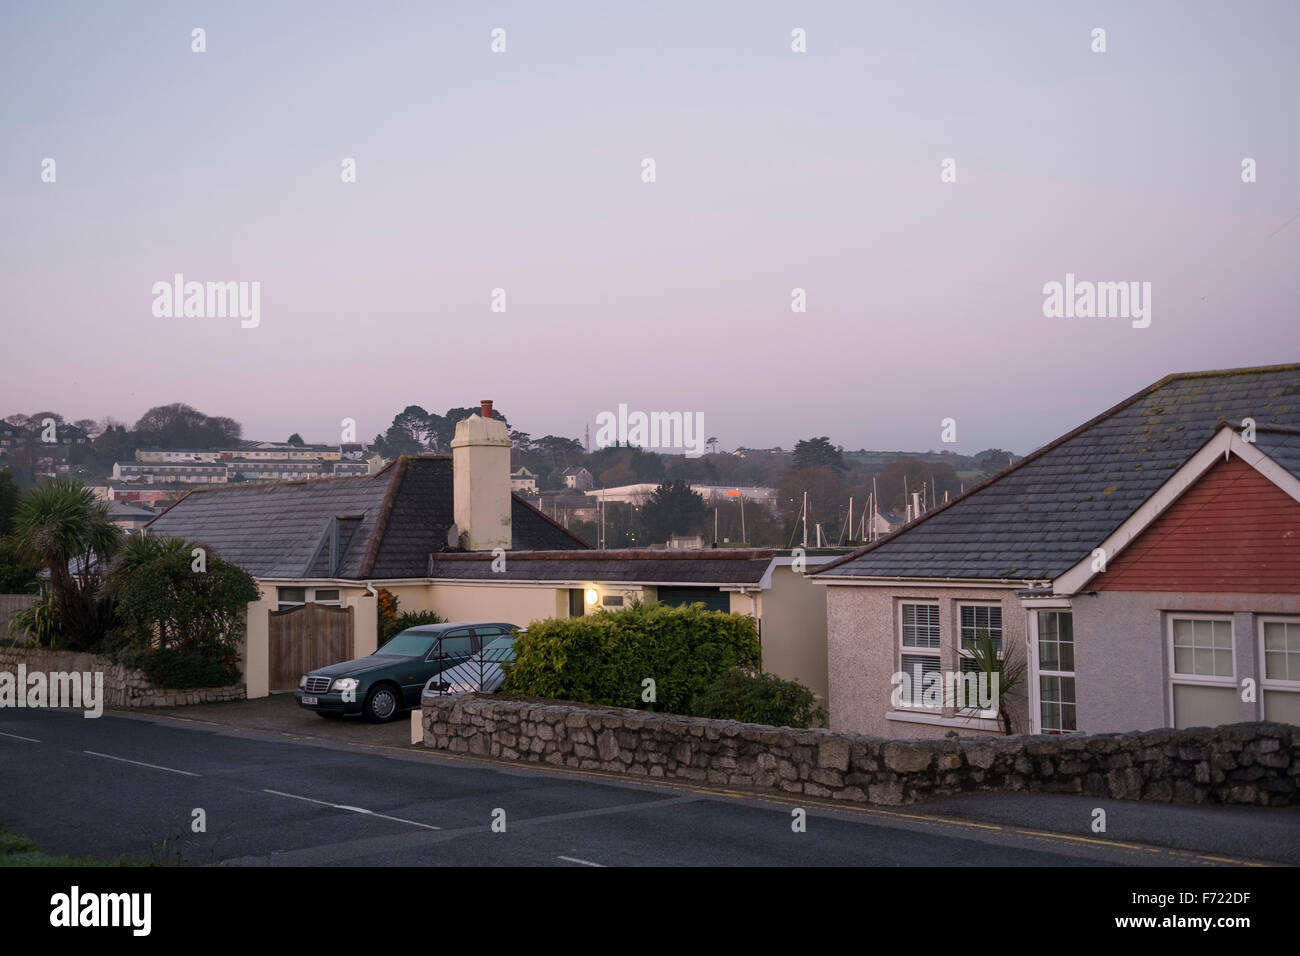 Residential houses in Falmouth, Conrwall, England Stock Photo